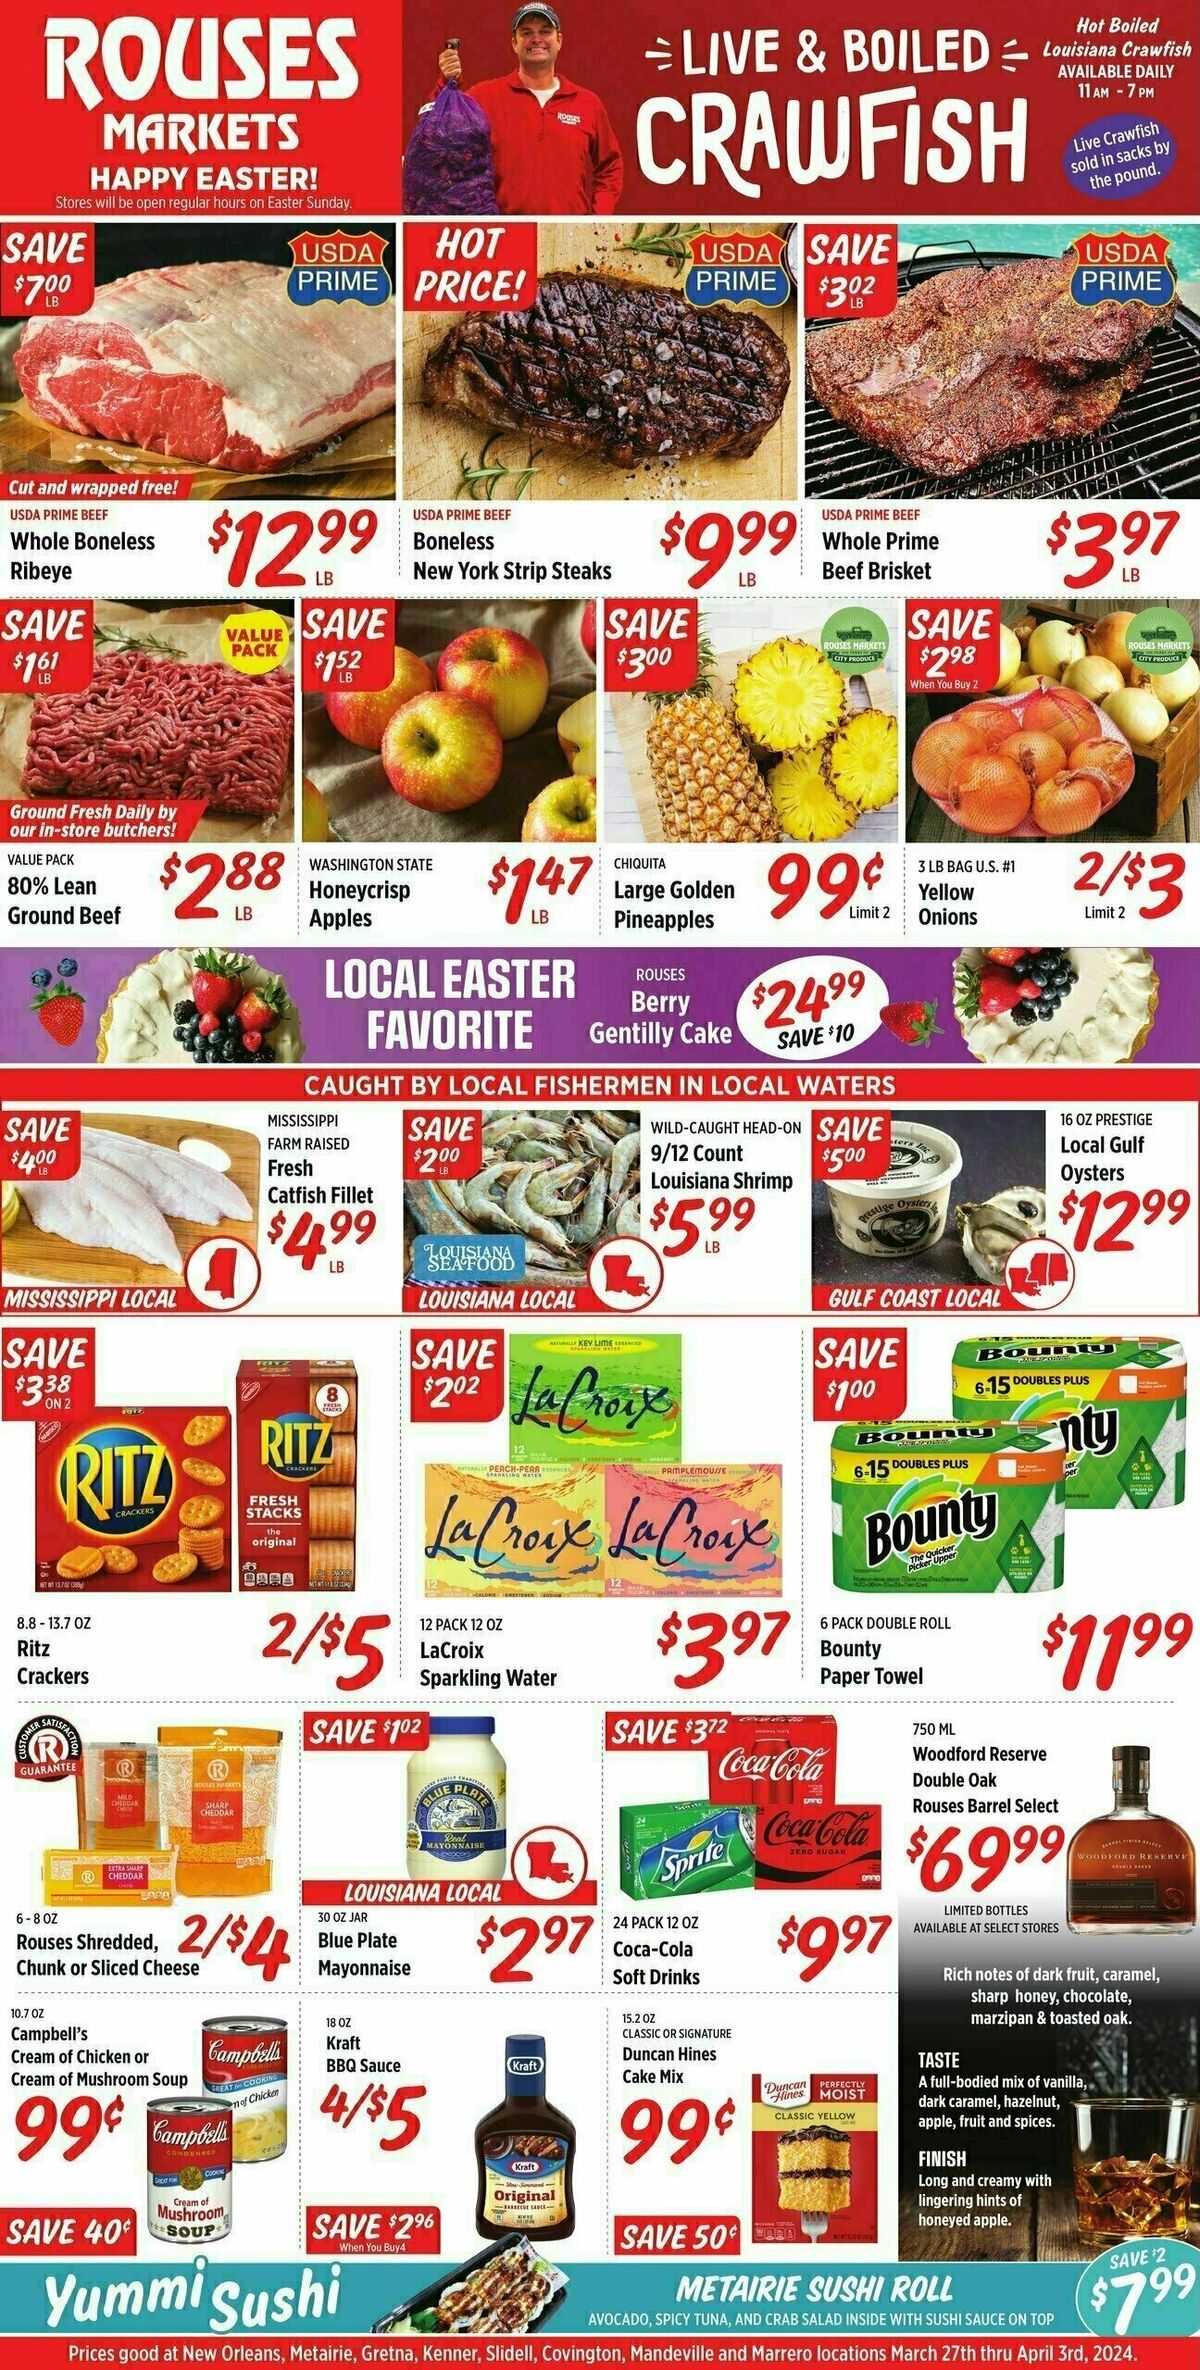 Rouses Markets Weekend Sale Weekly Ad from March 29